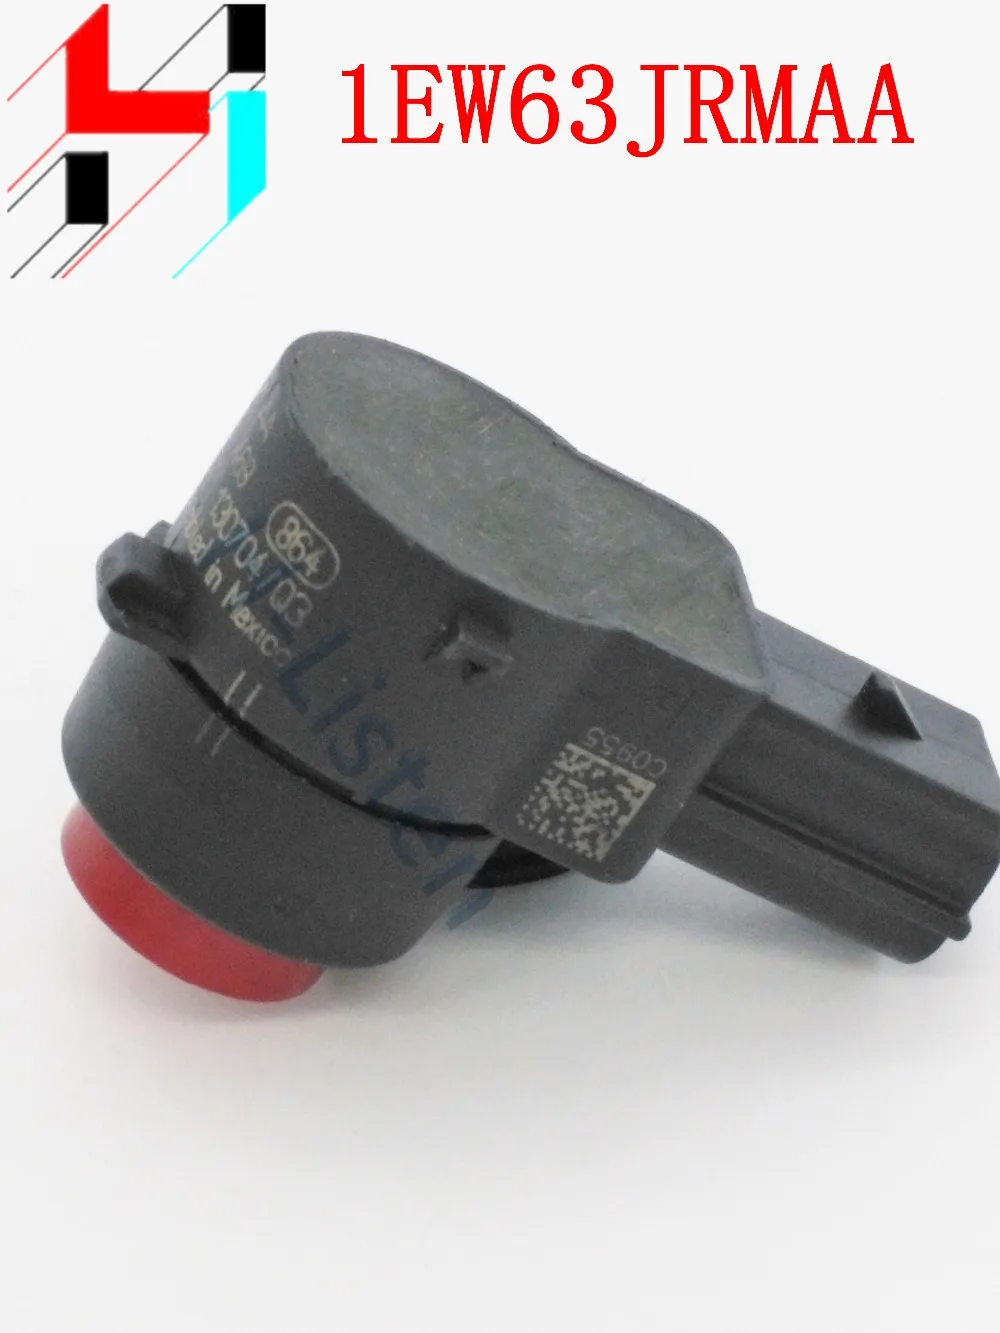 

1EW63JRMAA OEM 0263013469 PDC Parking Distance Control Aid Sensor For Je Ep Liberty 300 Gra Nd Che Rokee 2009-2013